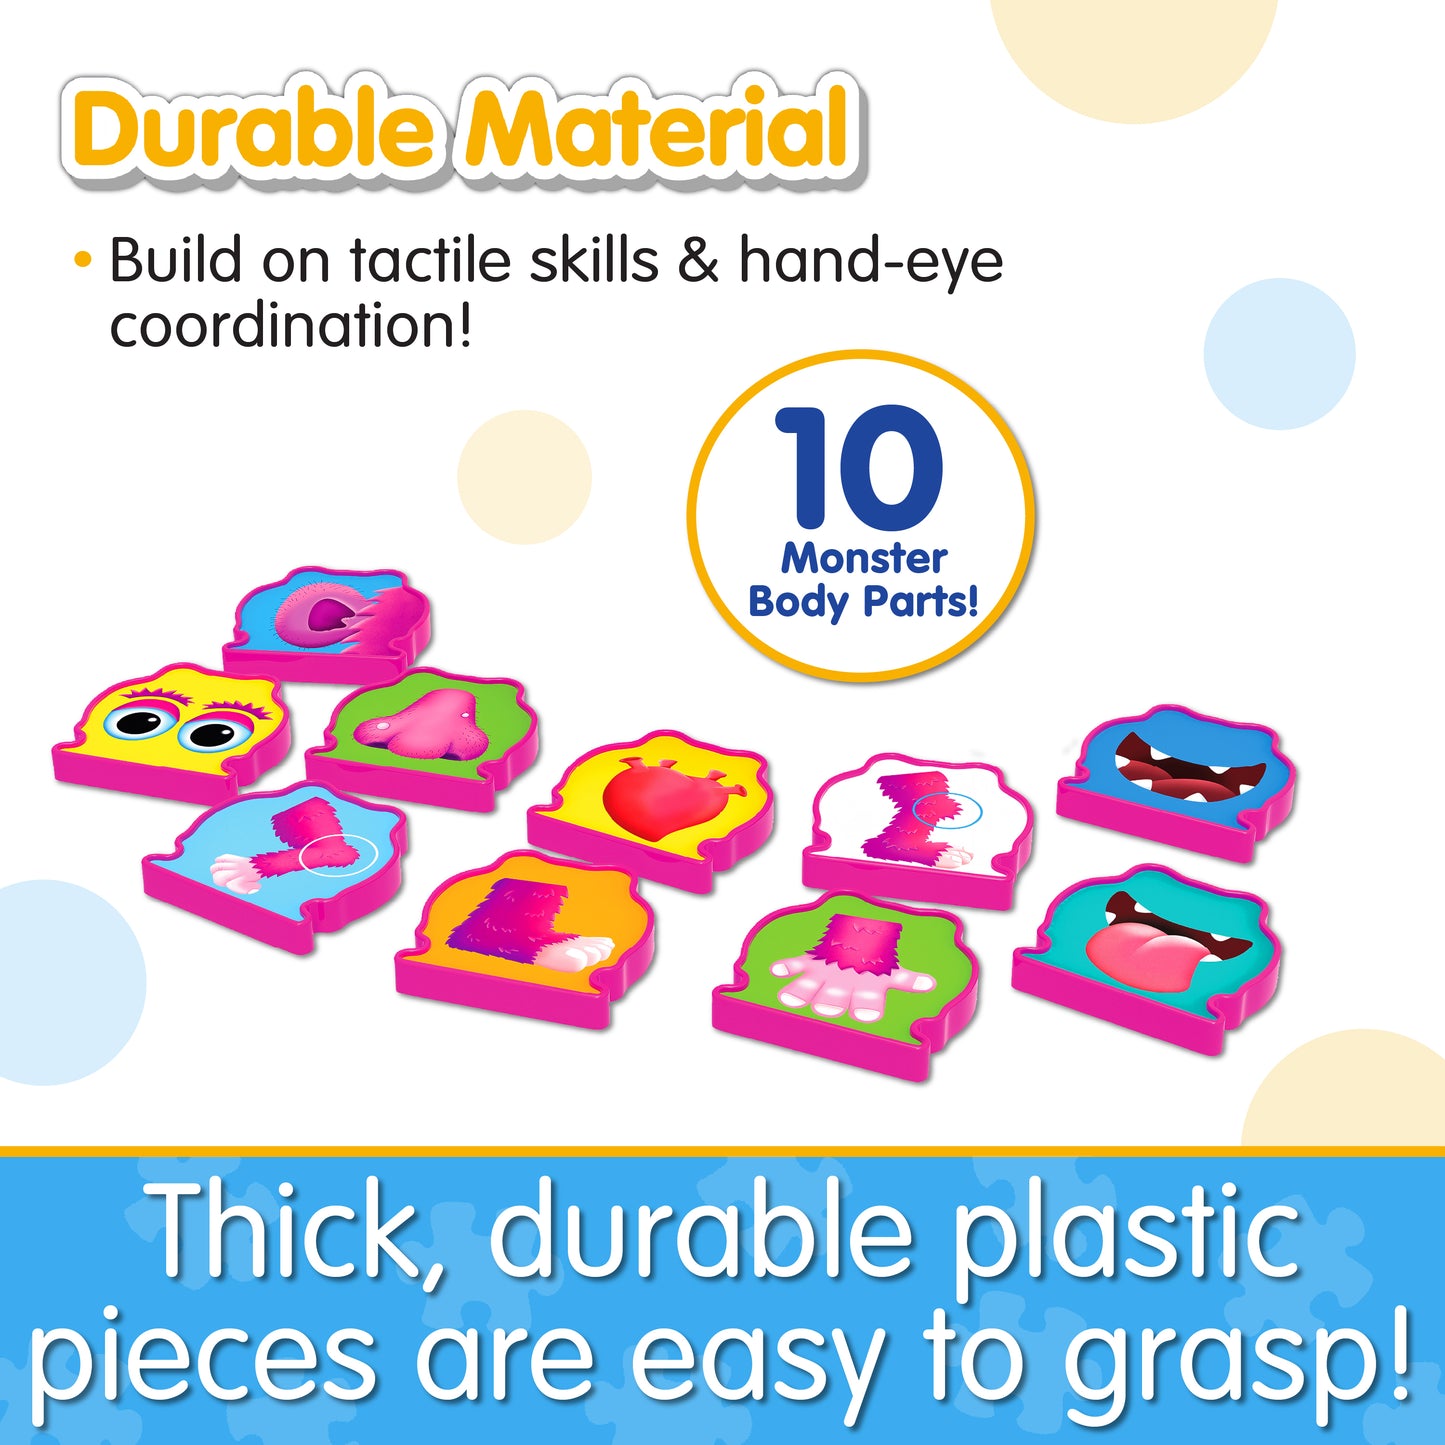 Infographic about Monster Me's durable material that says, "Thick, durable plastic pieces are easy to grasp!"